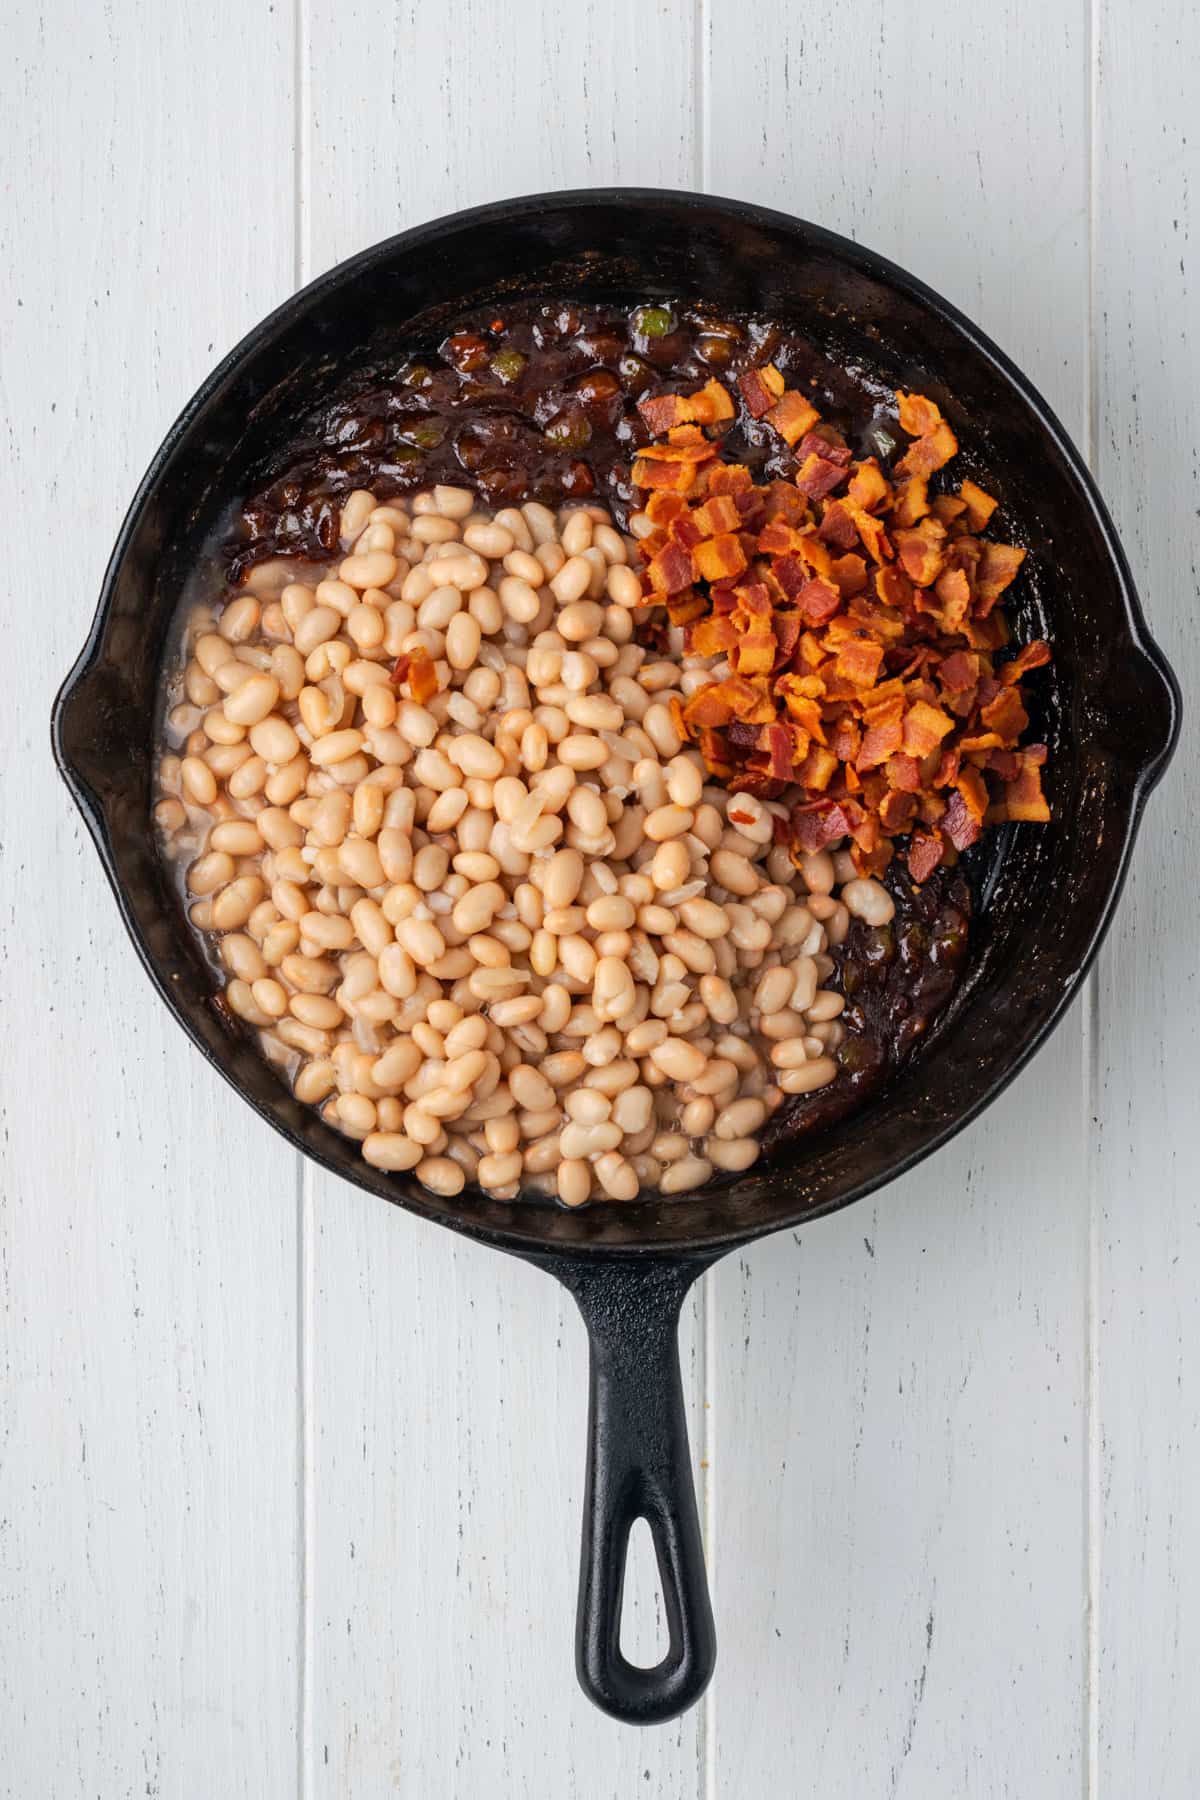 Navy beans and cooked bacon added to the bbq sauce in a cast iron skillet.